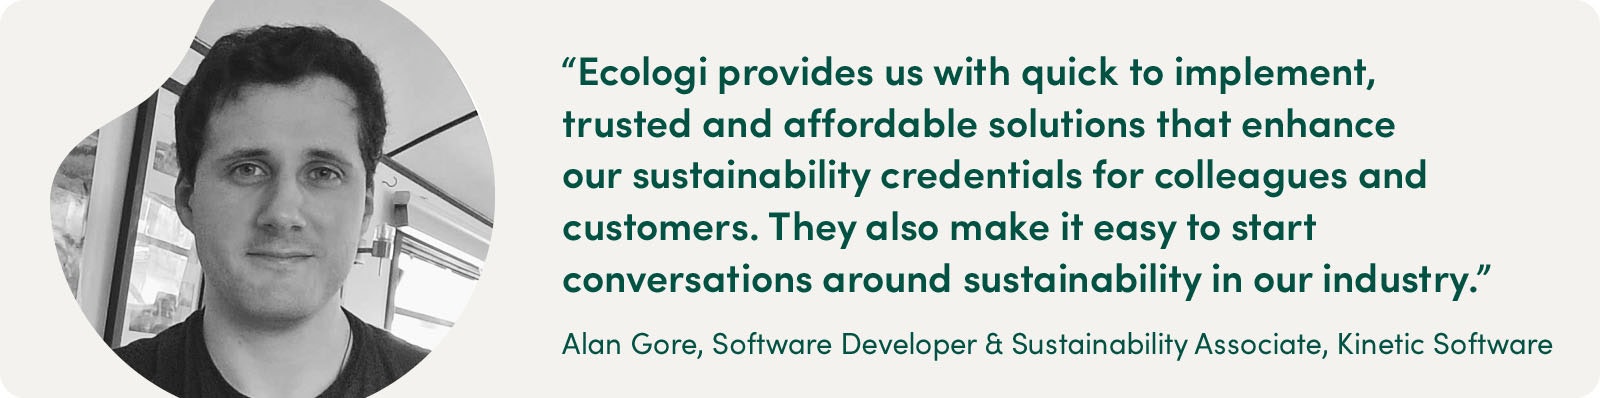 “Ecologi provides us with quick to implement, trusted and affordable solutions that enhance our sustainability credentials for colleagues and customers. They also make it easy to start conversations around sustainability in our industry.” - Alan Gore, Software Developer and Sustainability Associate at Kinetic Software